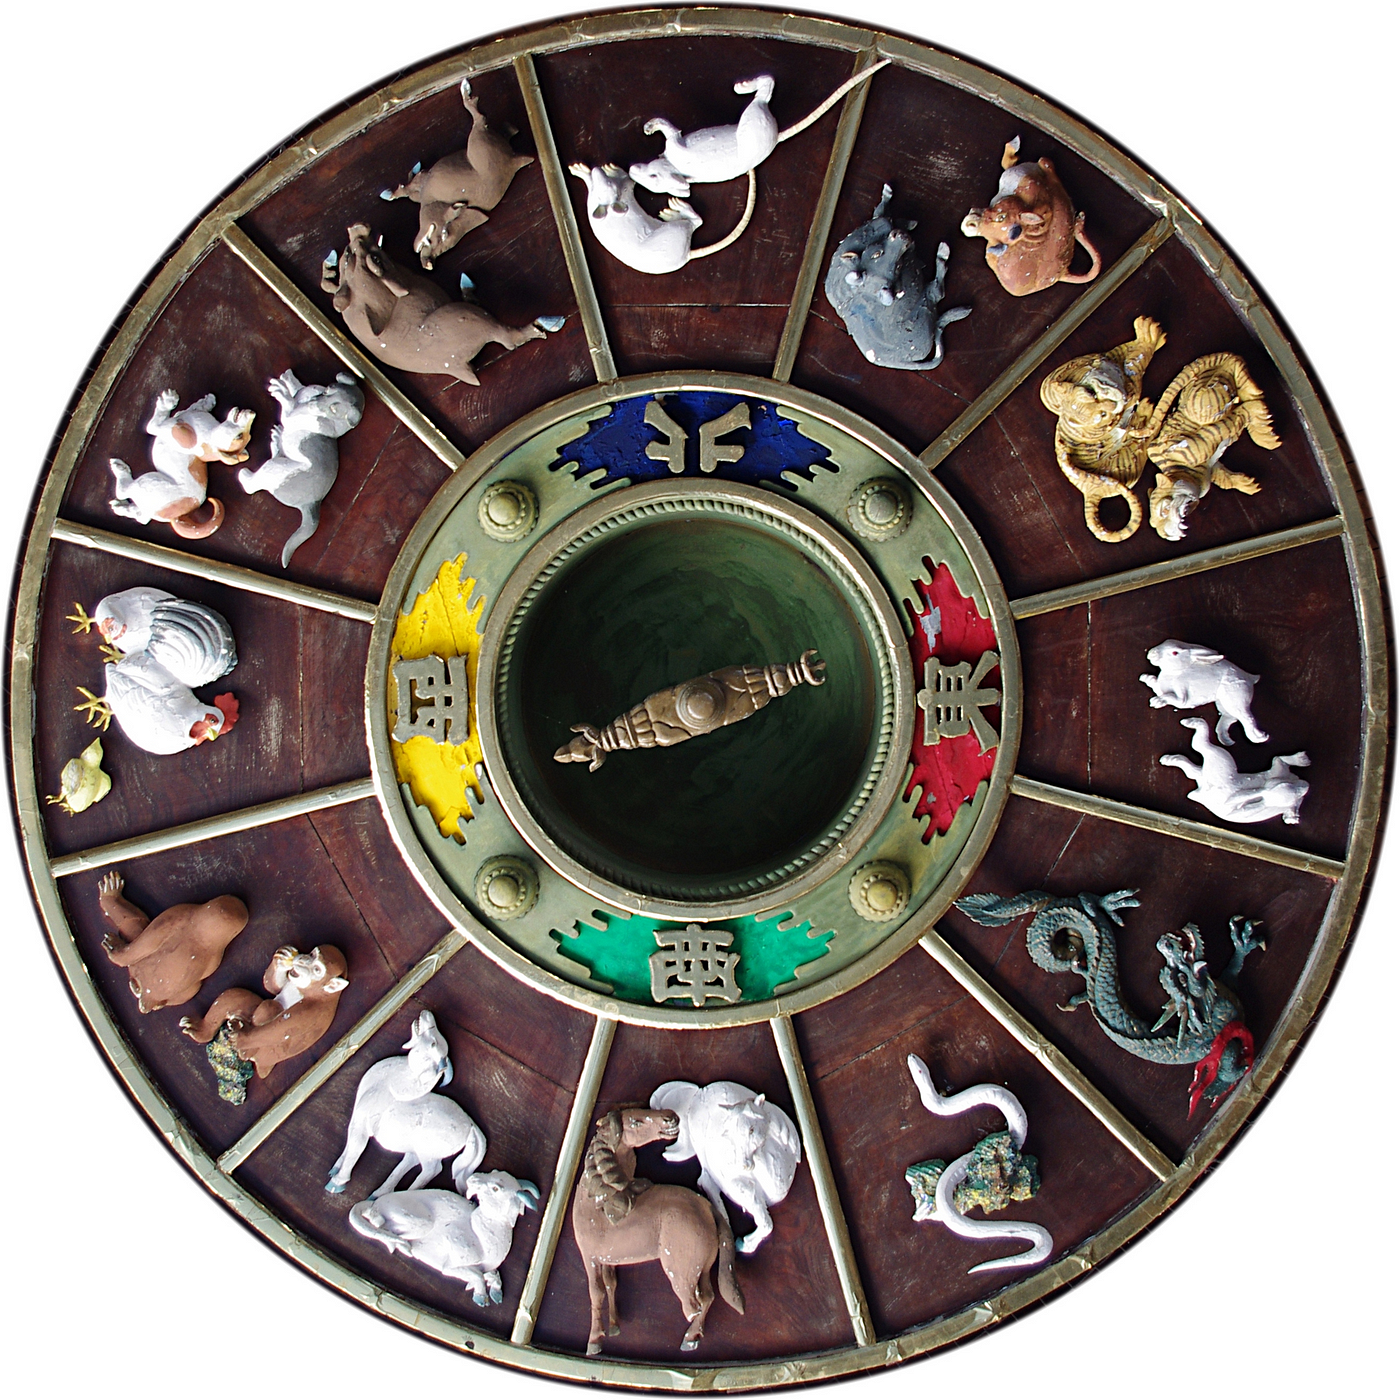 What's Your Sign? Celebrate Chinese New Year with a DIY Zodiac Wheel